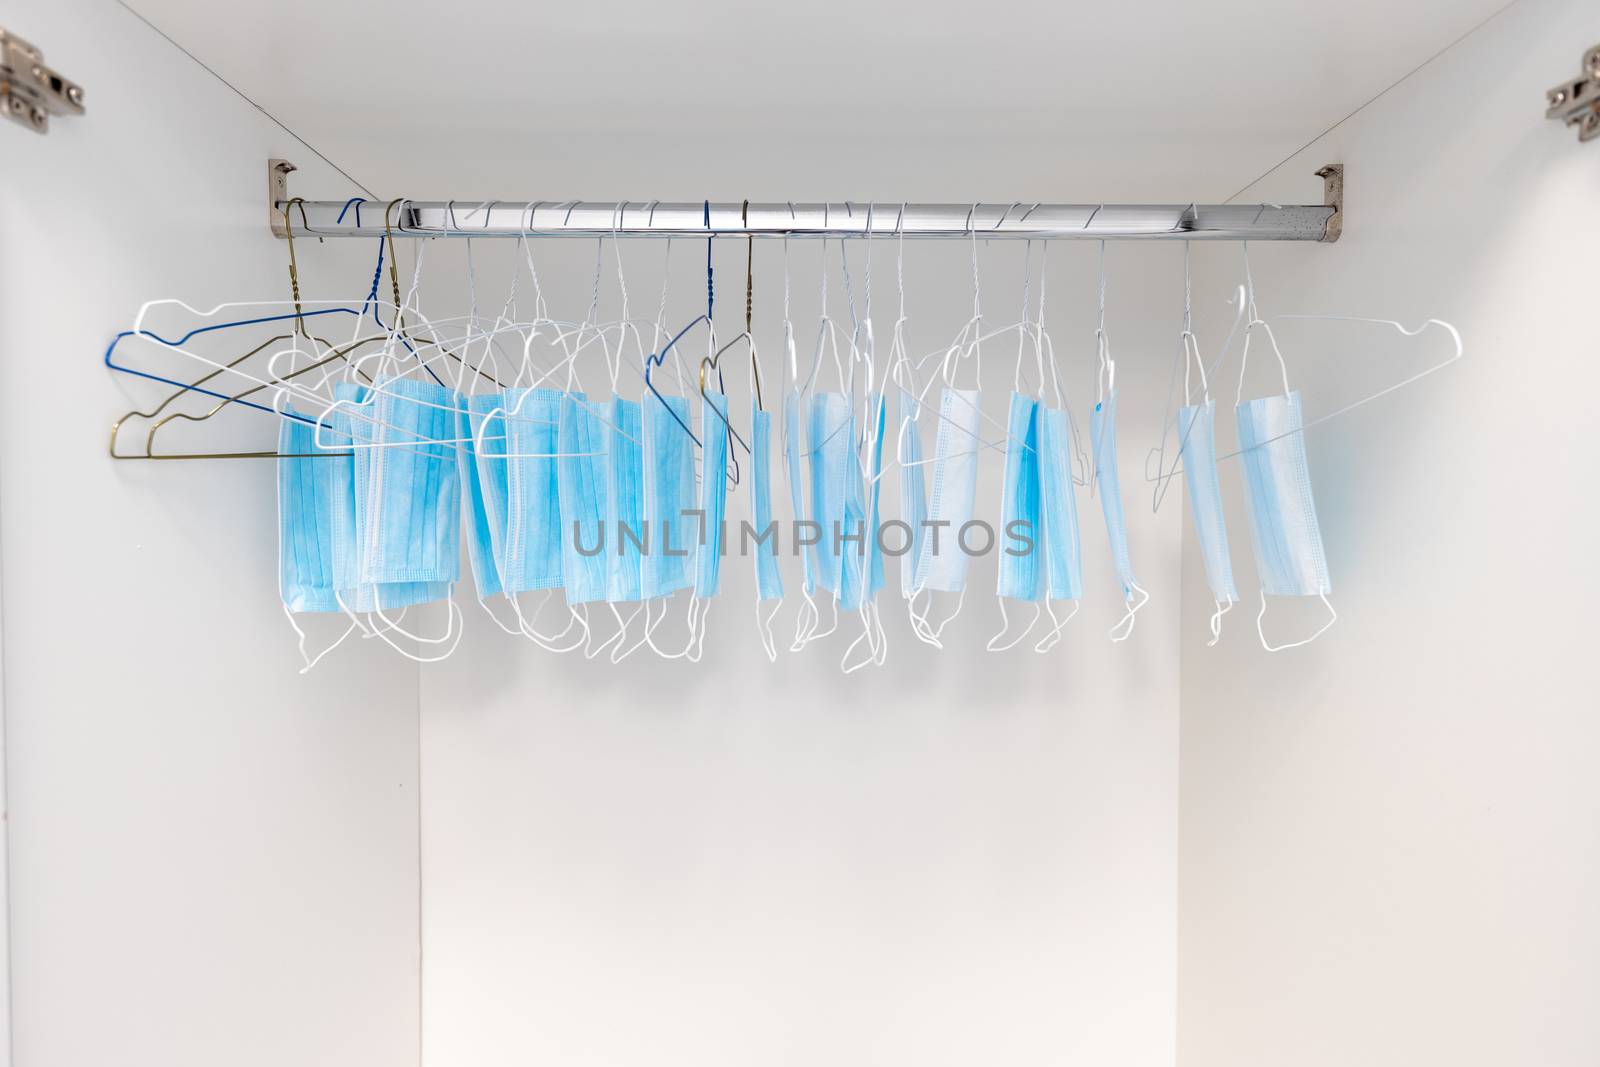 Disposable surgical masks hanging on hangers in a wardrobe closet. Concept of new normal. Concept of waring a mask becoming e new habit. Concept of adaptation during crisis and pandemic due to Covid.